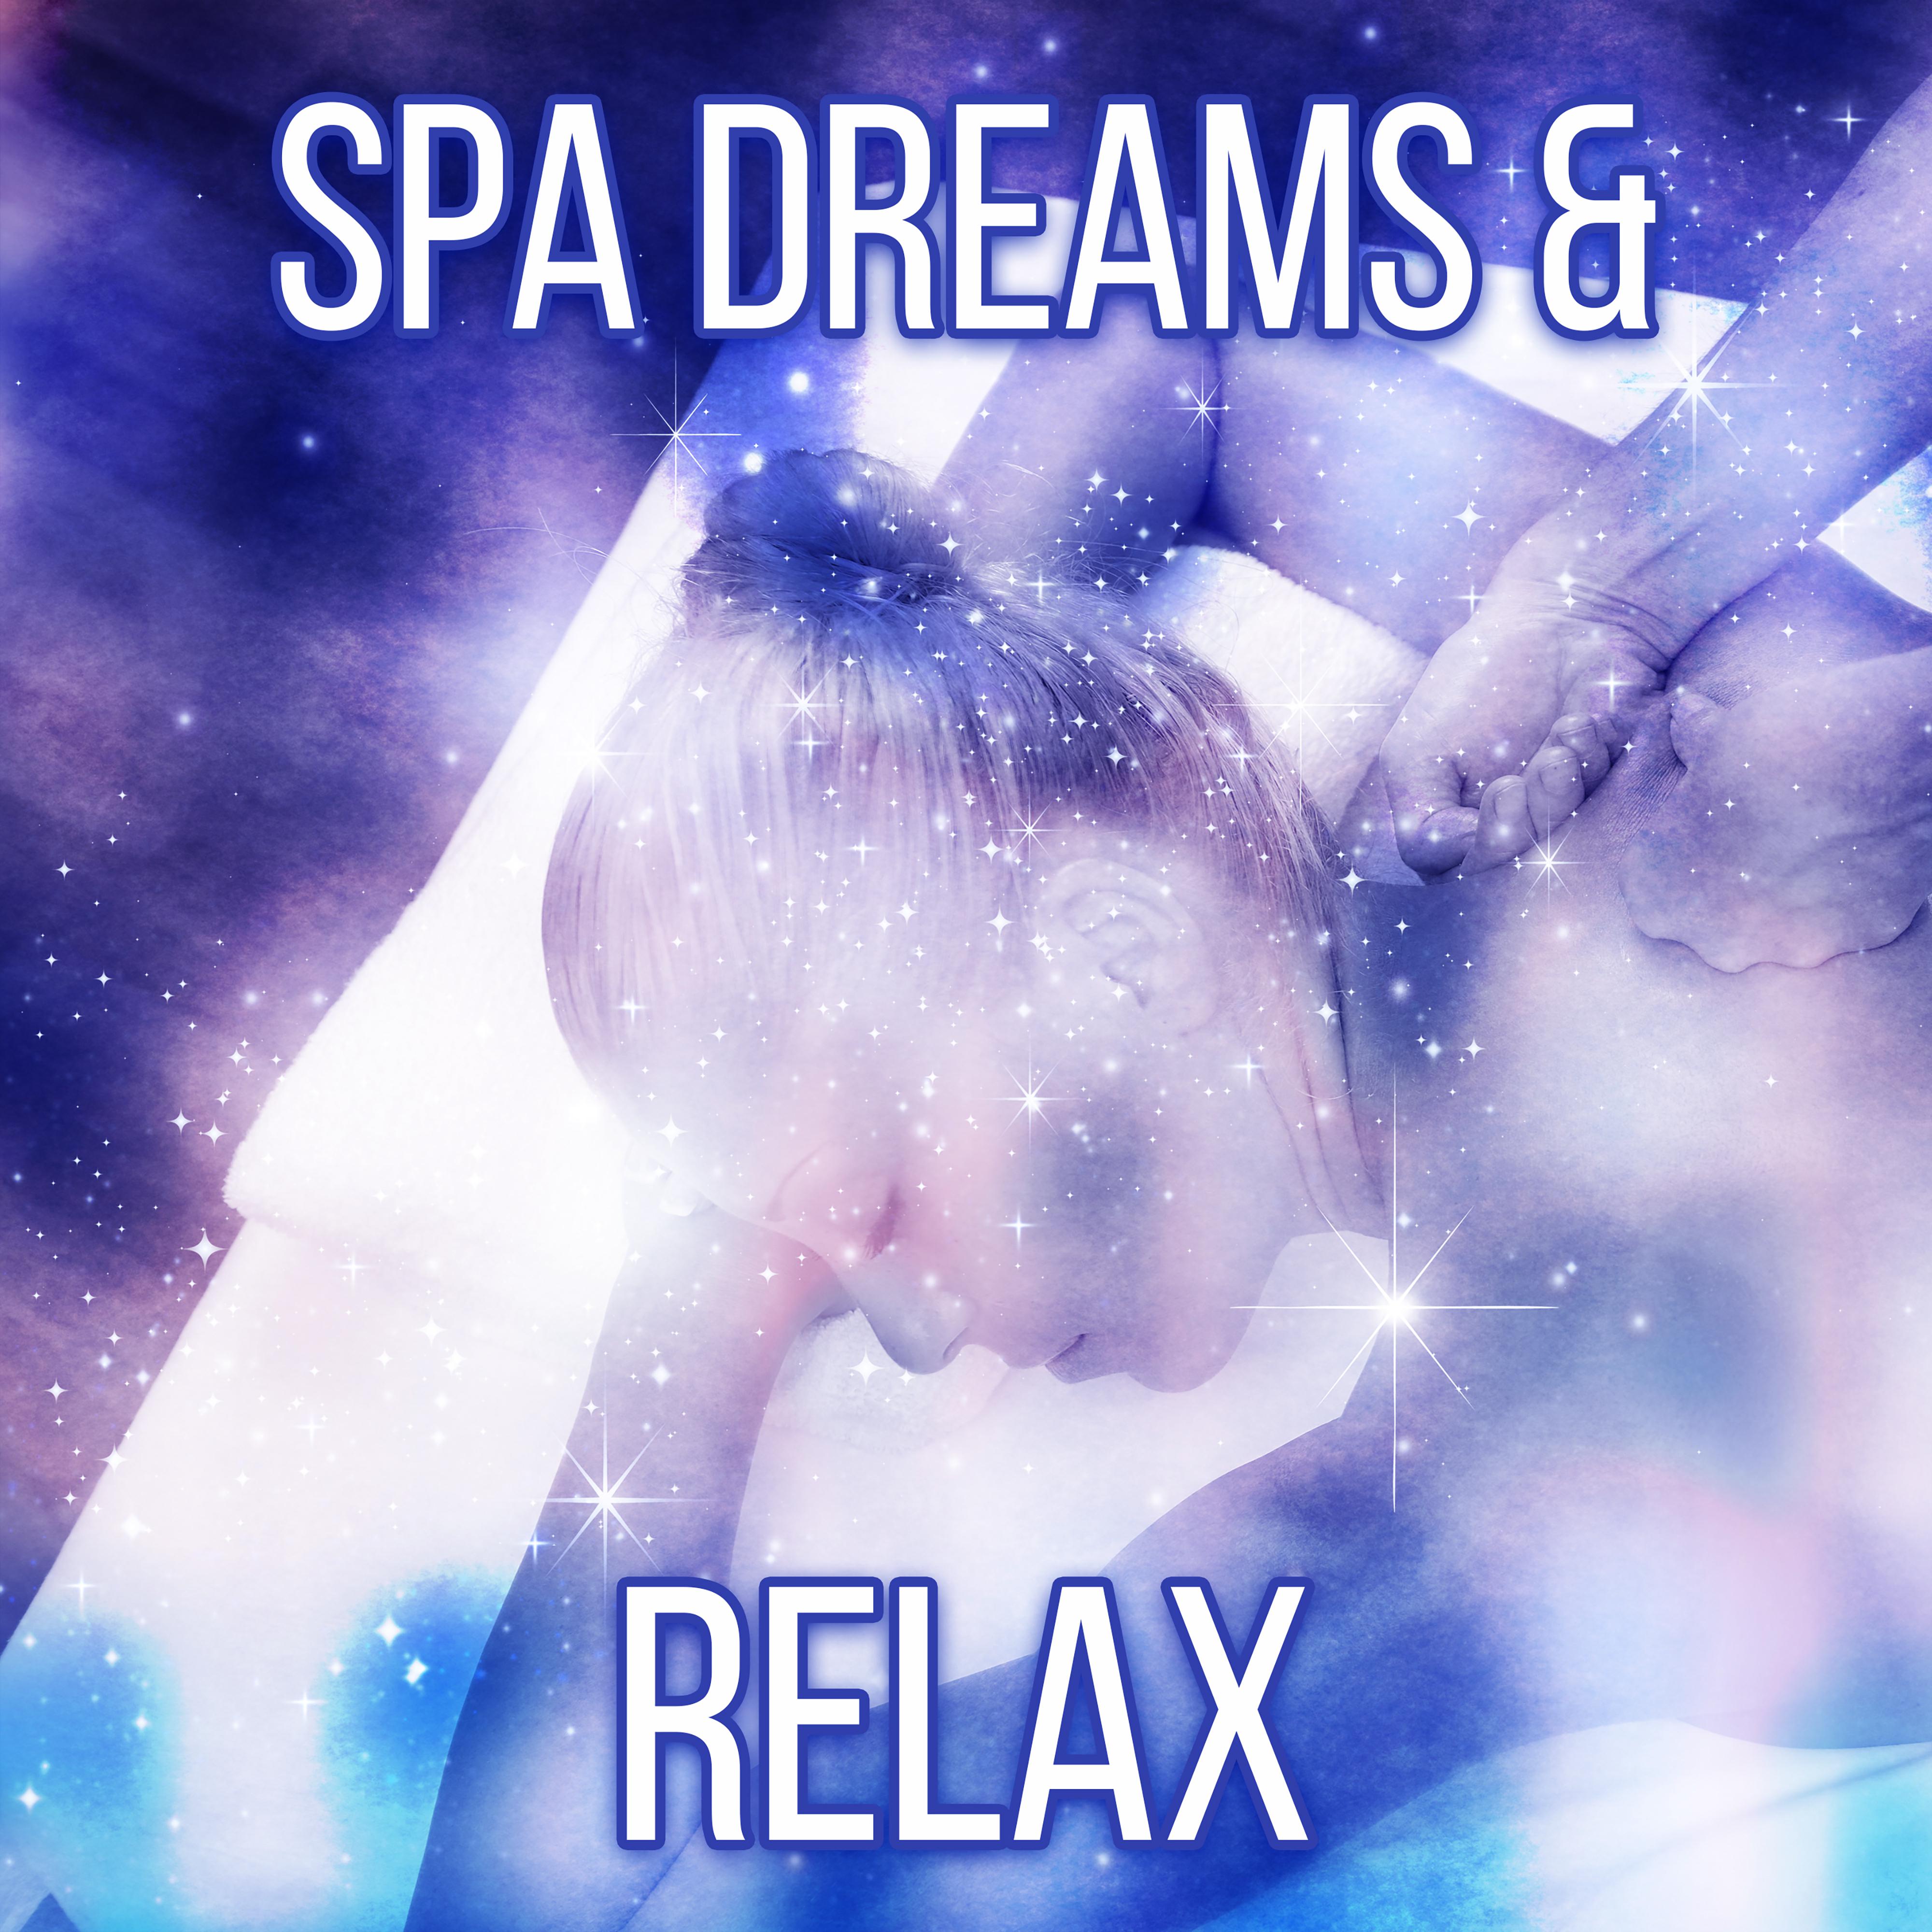 Spa Dreams & Relax – Sounds for Wellness, Restful Spa, Relaxation Massage, Gentle Melodies, Soft Music